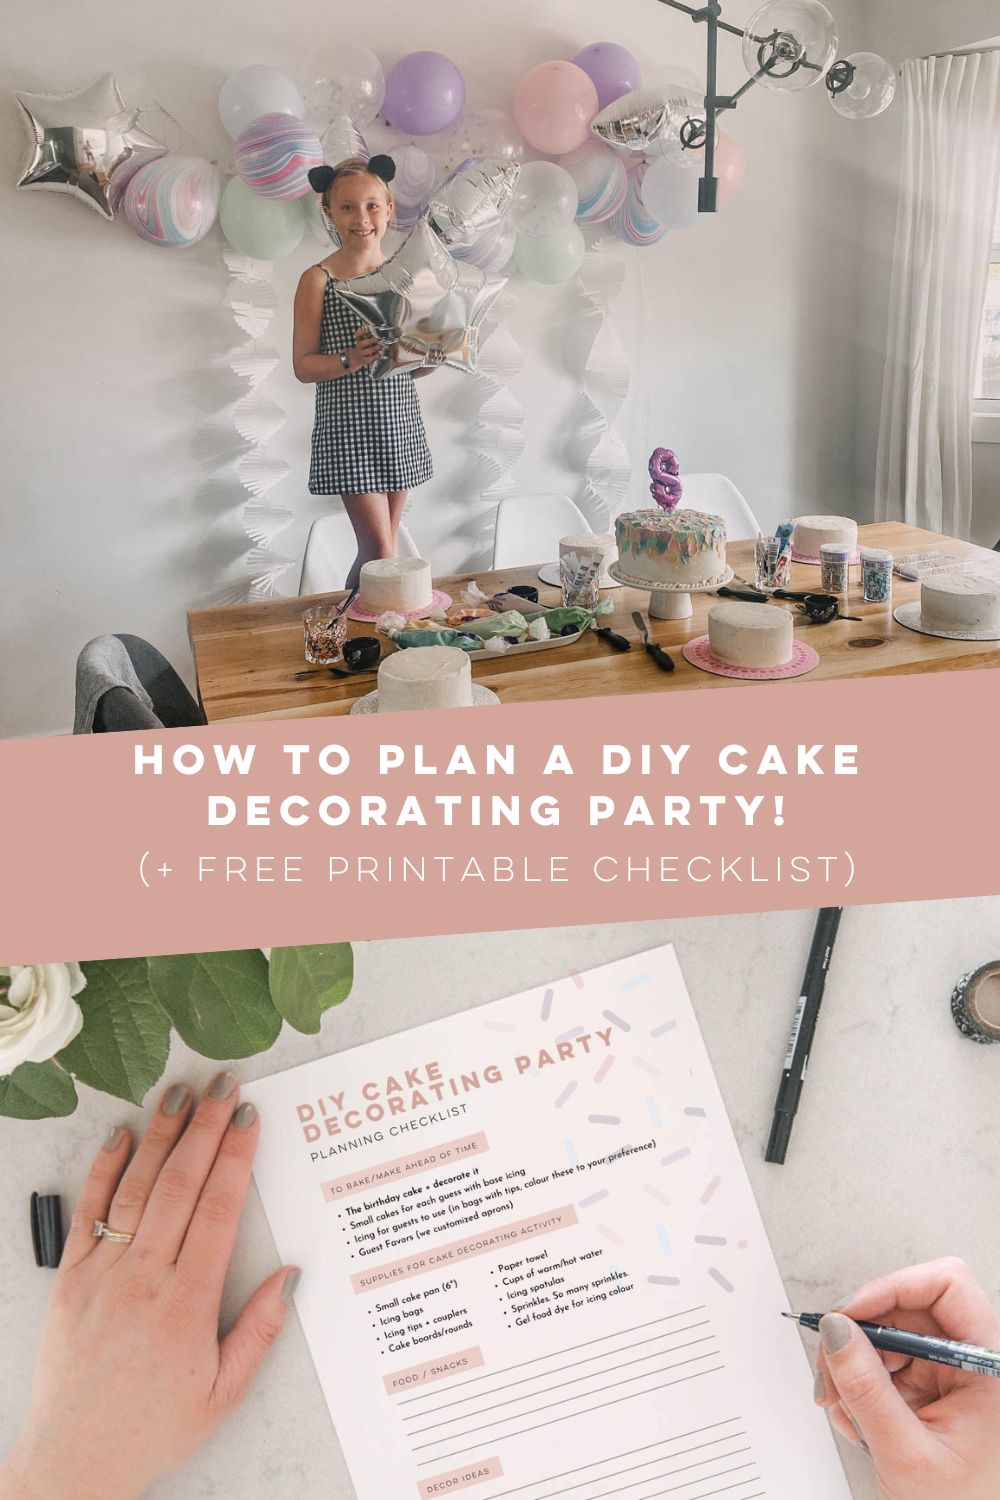 How to plan a cake decorating party (collage pin of two images) top image: girl standing in front of pastel balloon garland and set table for cake decorating, bottom photo: cake decorating party printable planner